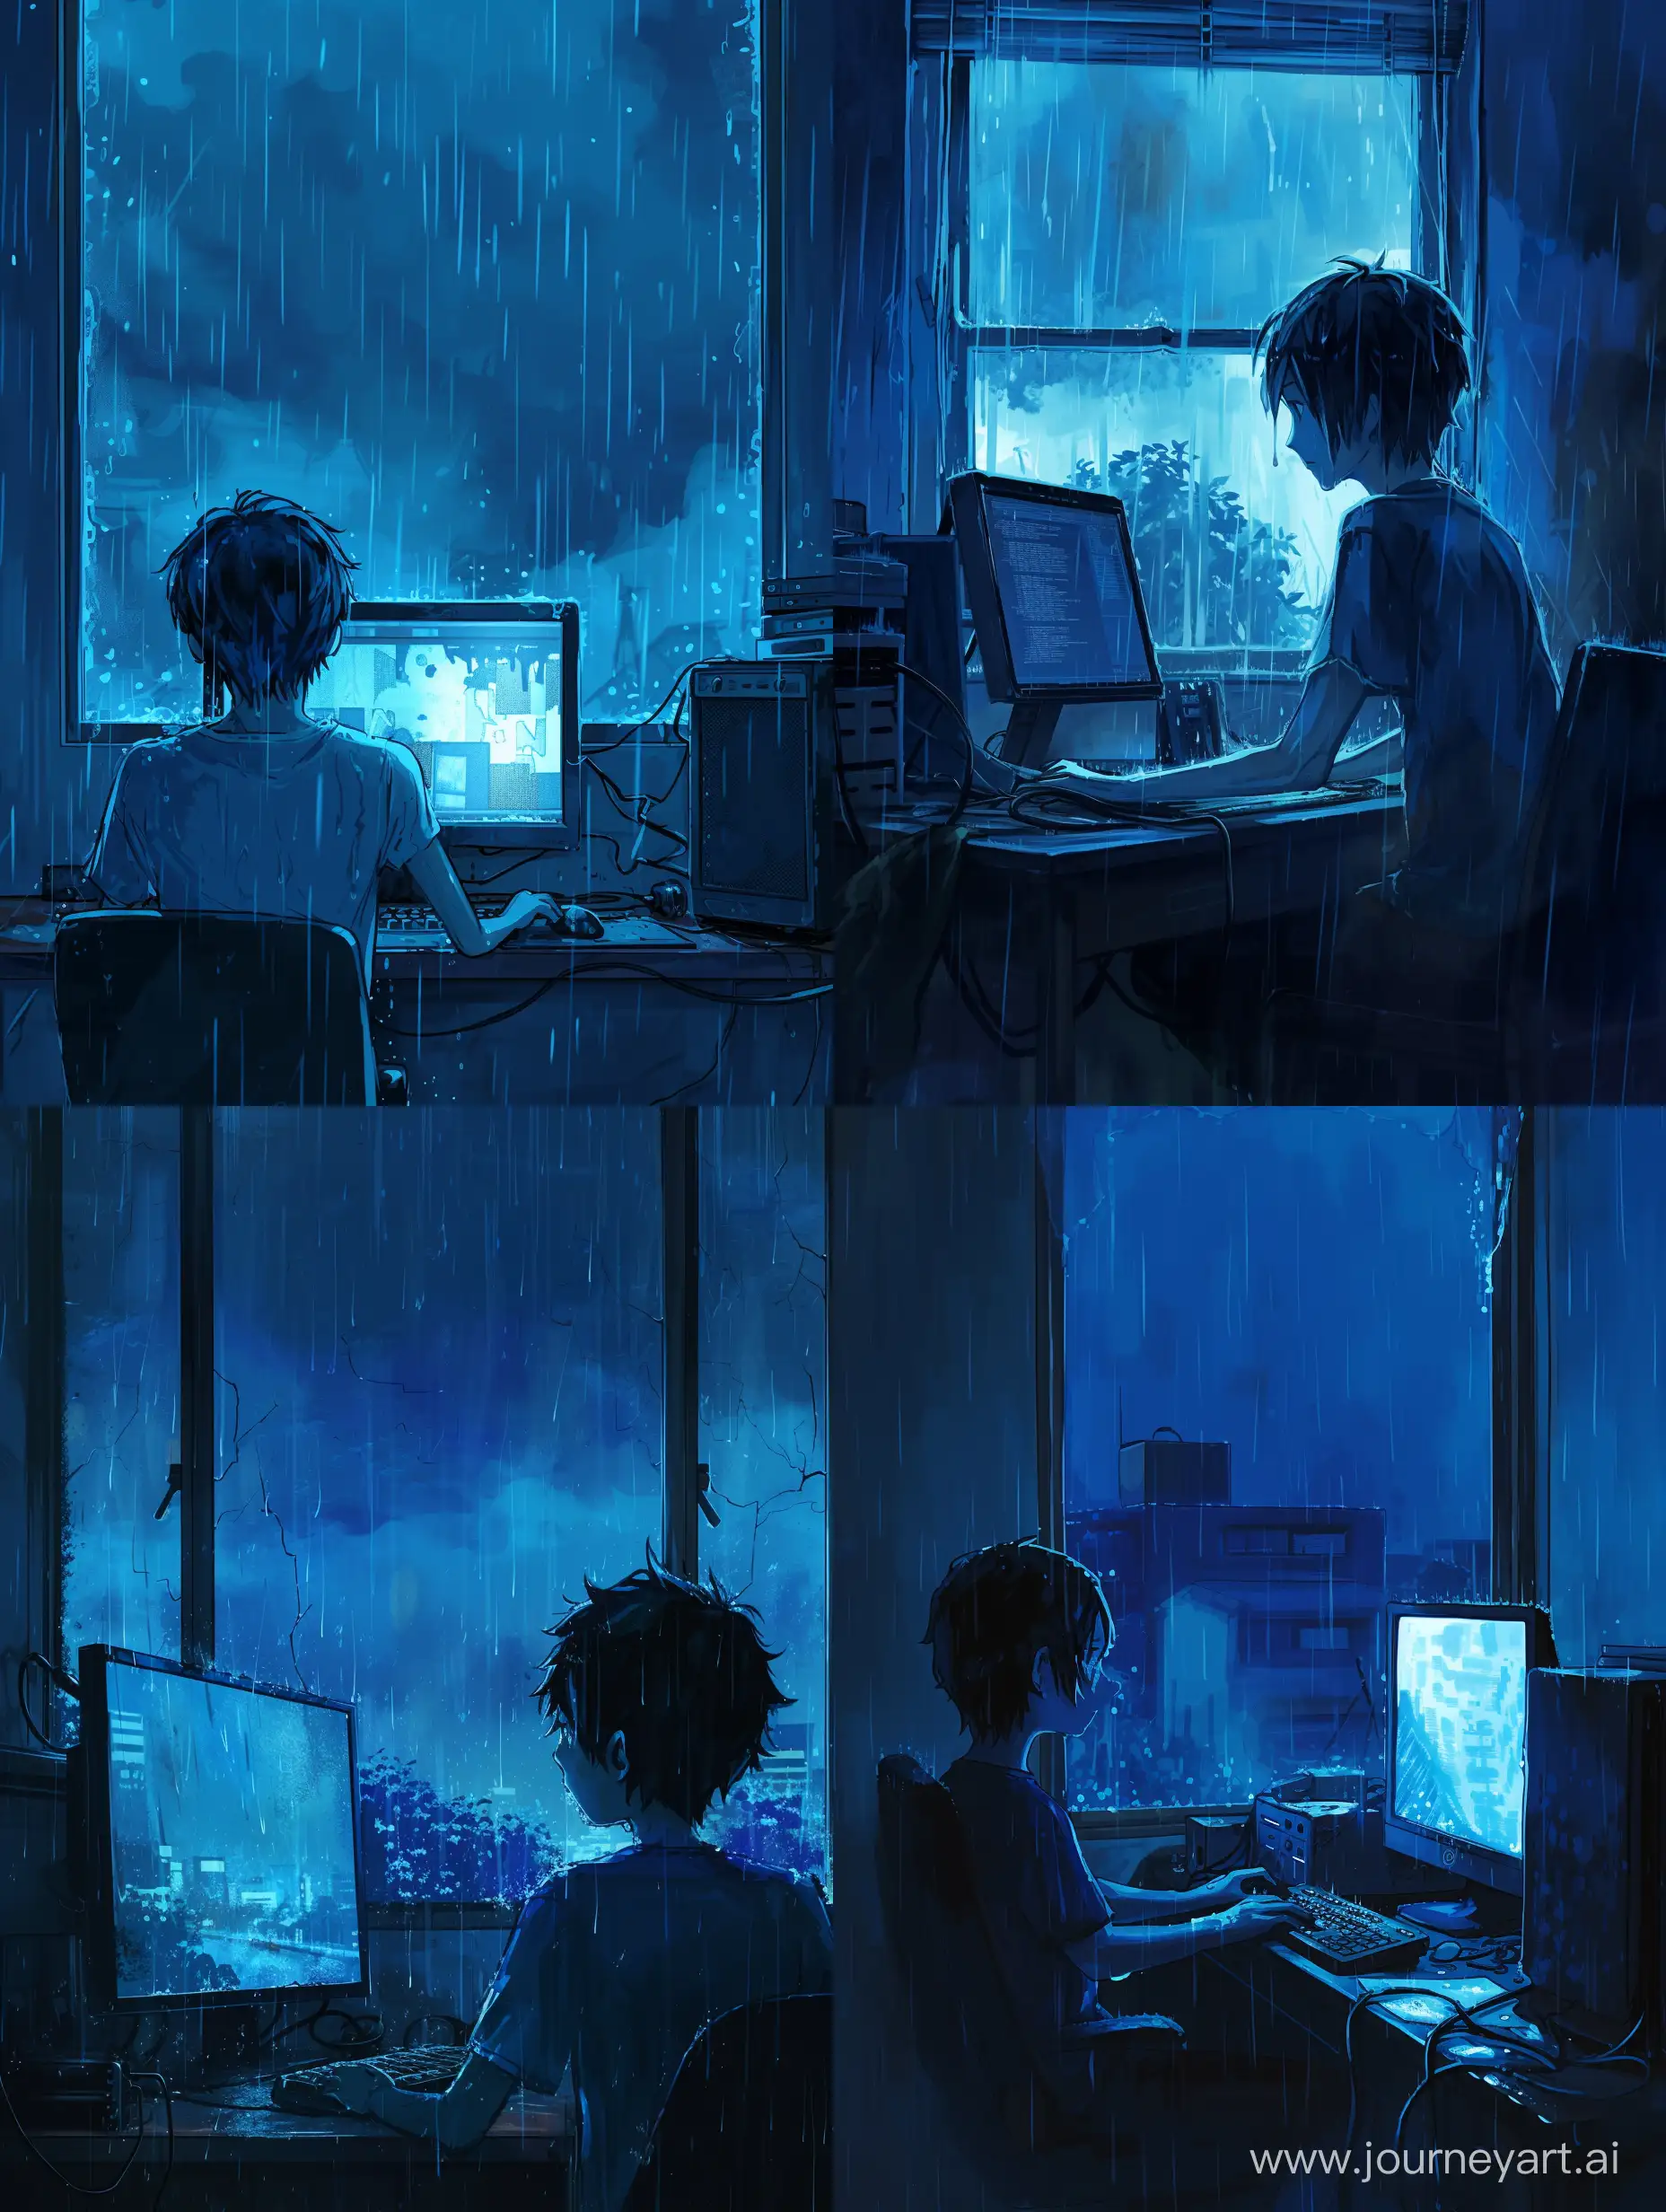 anime style, boy 16 years old and computer, despair, rain outside the window, blue tones, dark room.